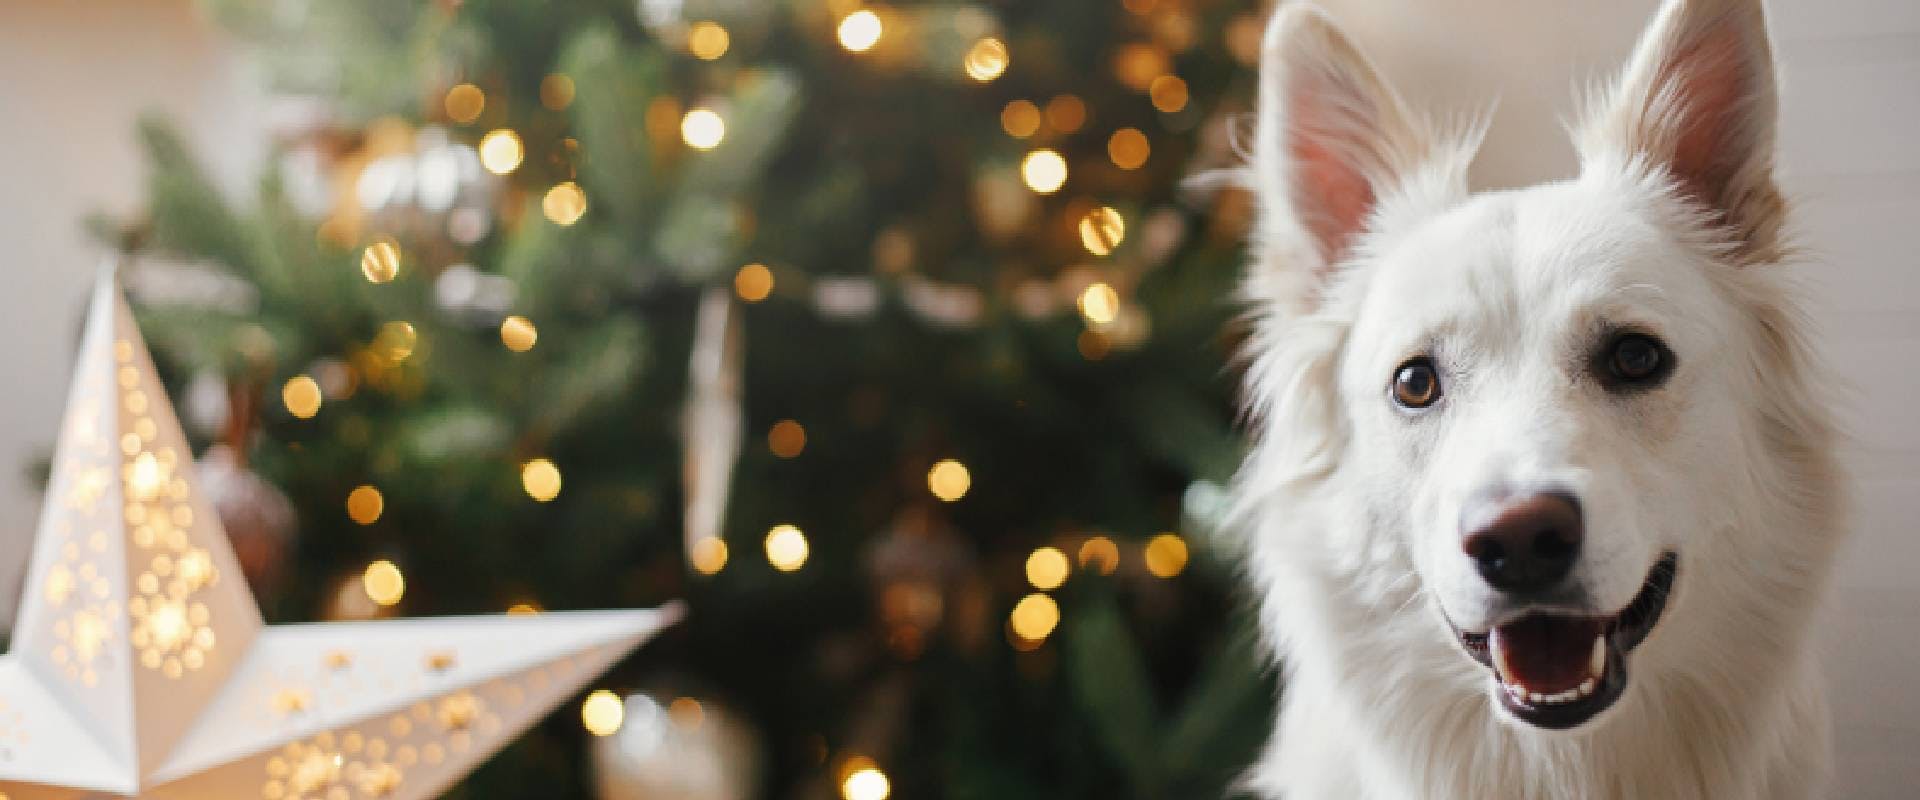 White dog in front of a Christmas tree